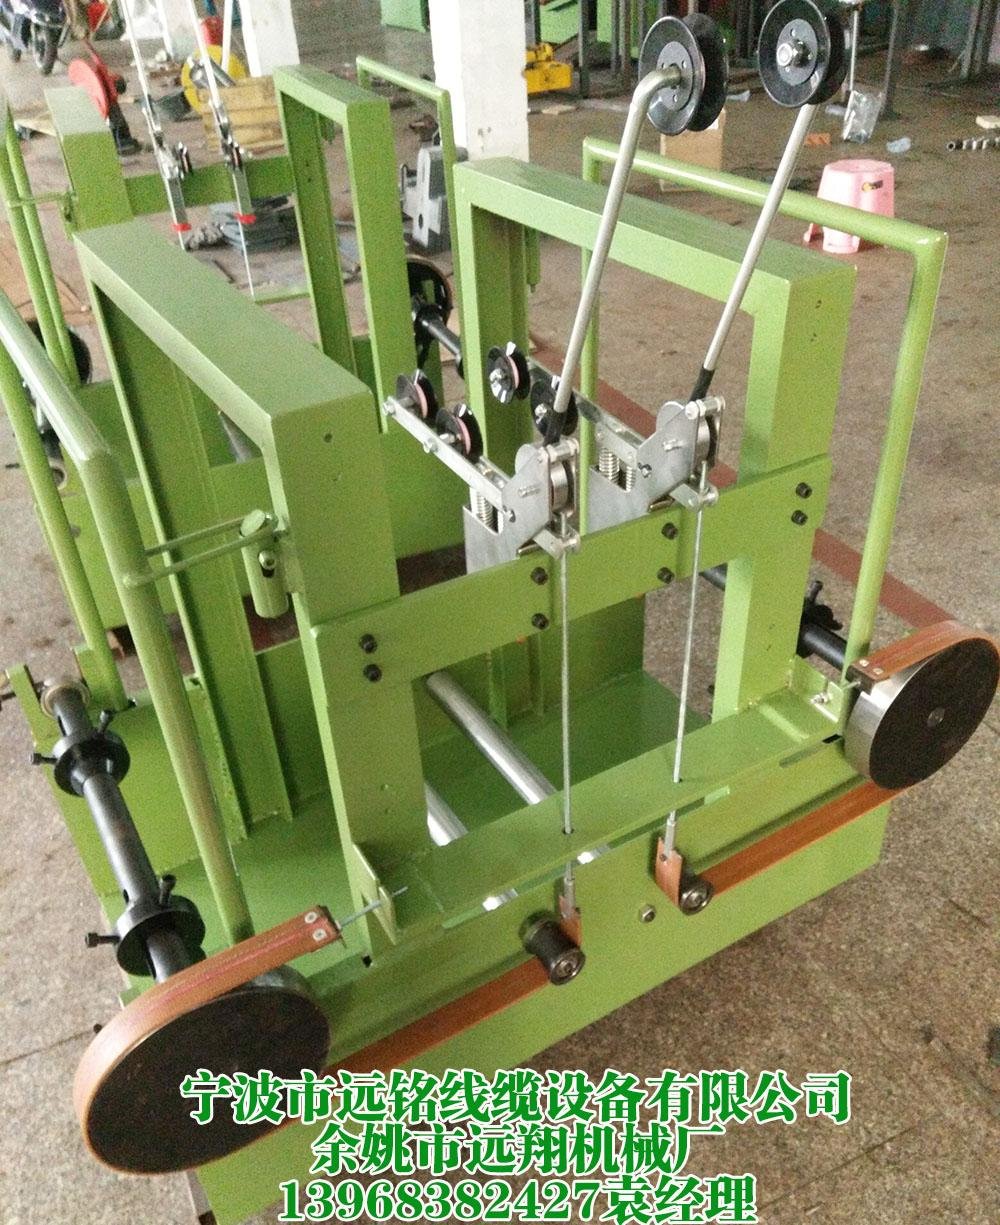 Wire and cable release frame moving disk firing frame active laying frame 2